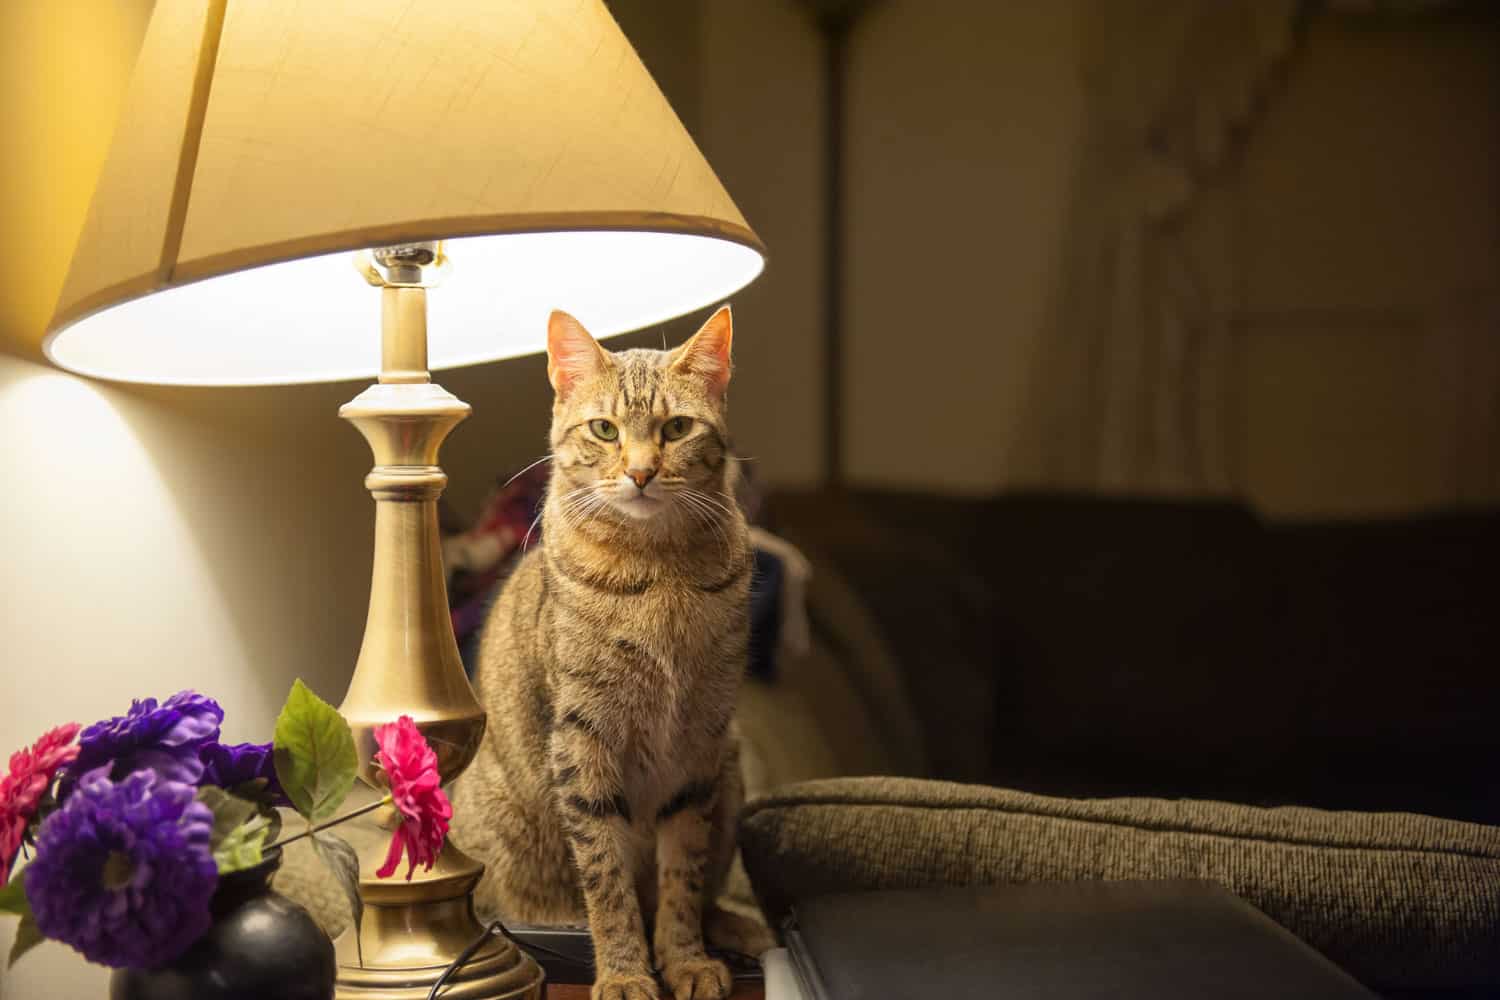 A beautiful cat sits on an end table and directly beneath a table lamp in a living room setting
